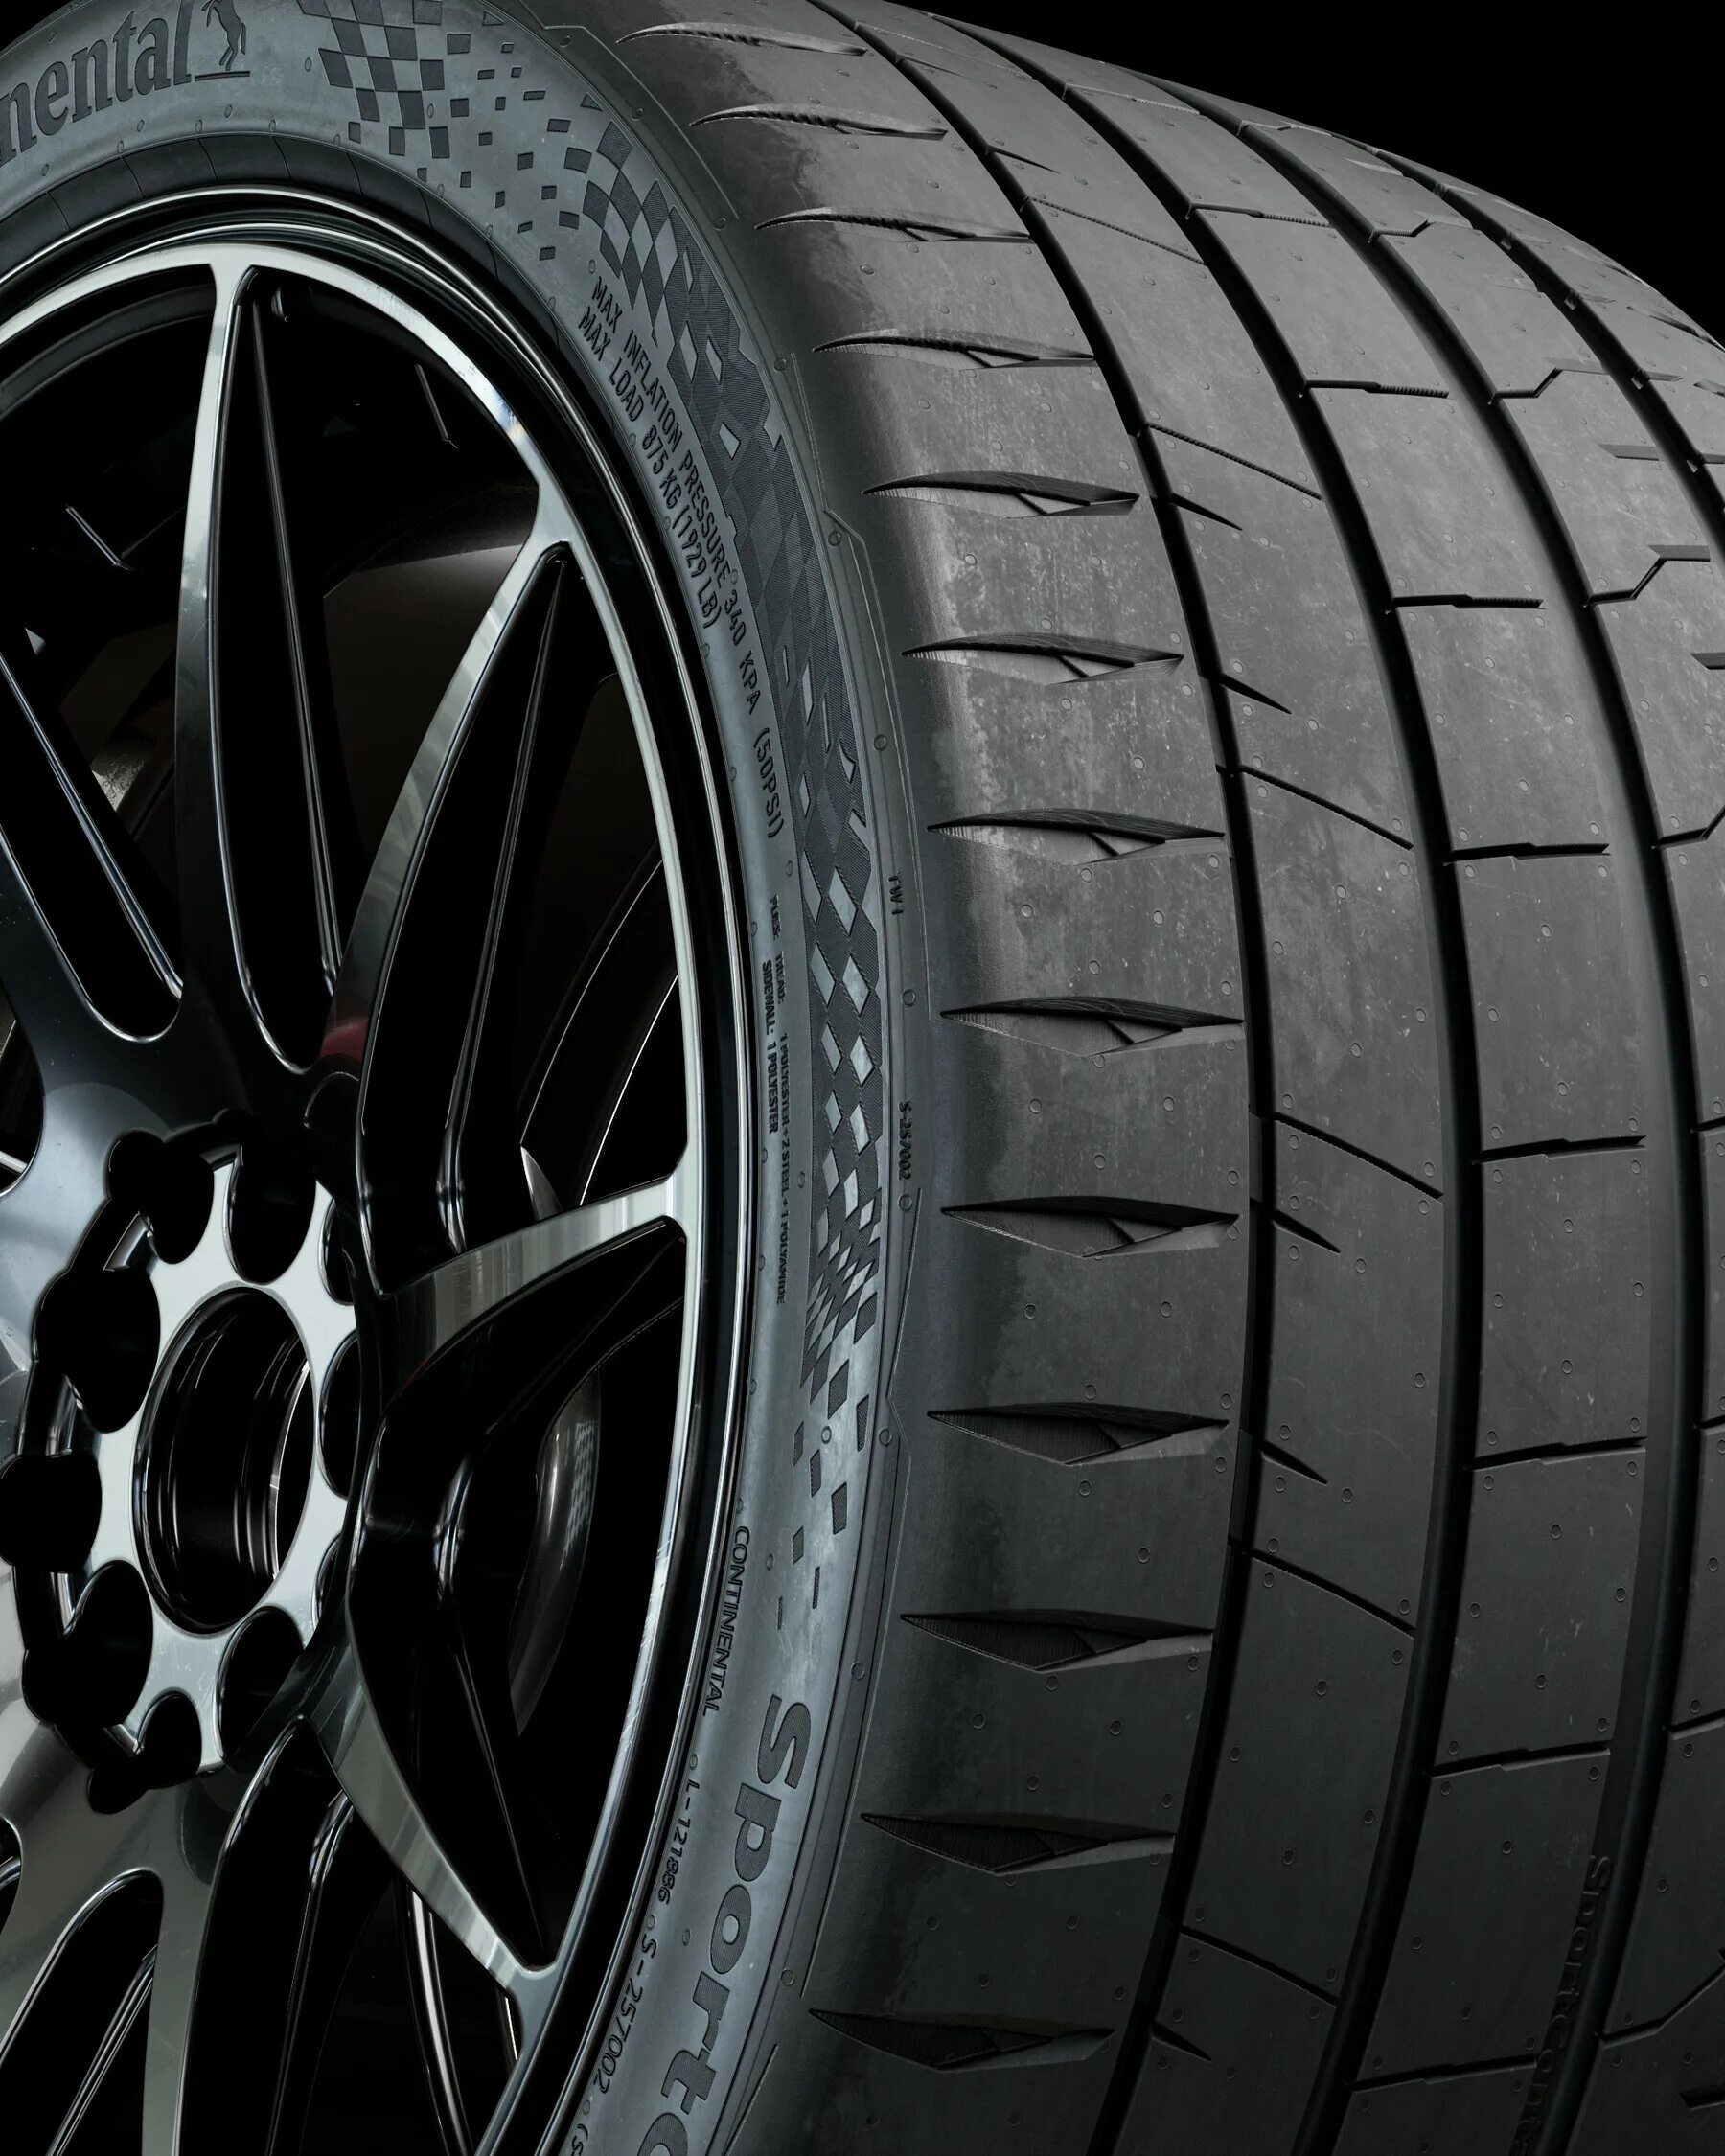 Continental SPORTCONTACT 7. Continental SPORTCONTACT 7 315/35 r22. Continental SPORTCONTACT 7 315/30 r22. CONTISPORTCONTACT 7. Continental conti sport